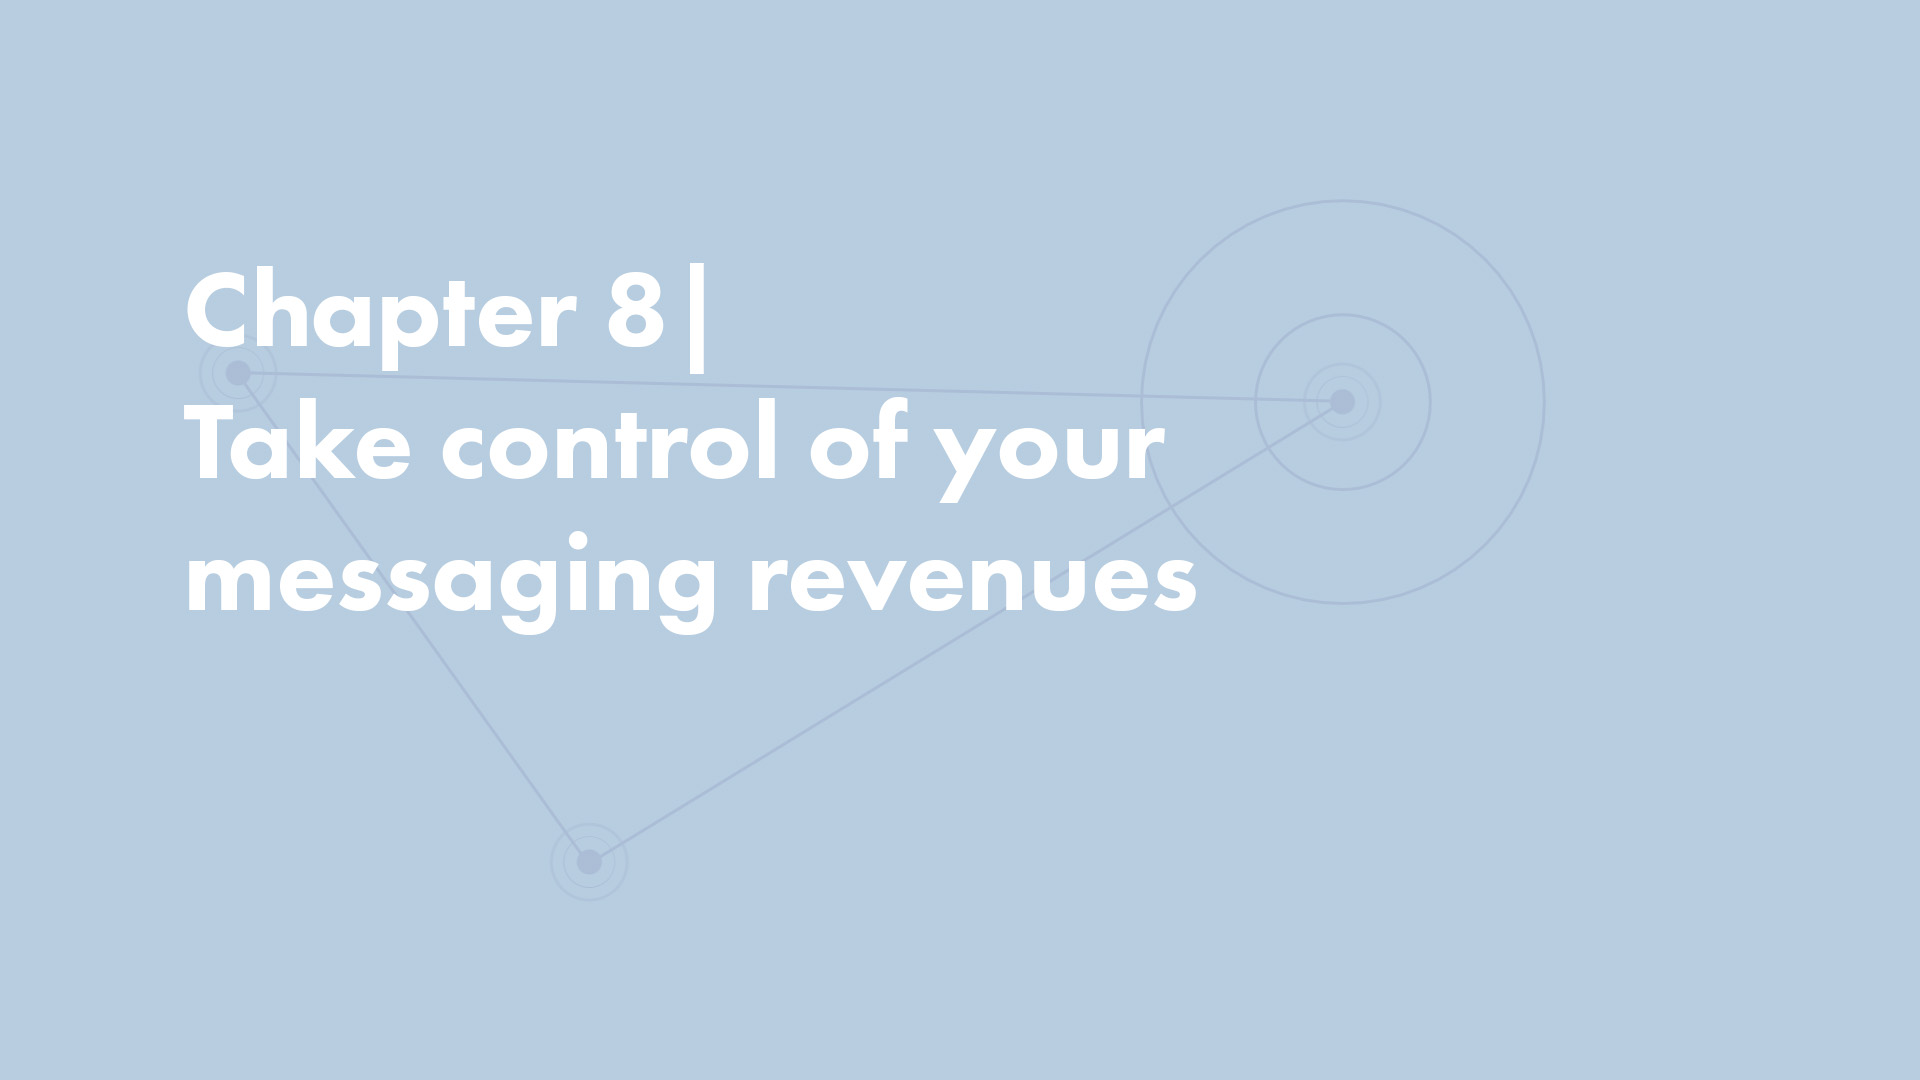 Chapter 8 | Take control of your messaging revenues